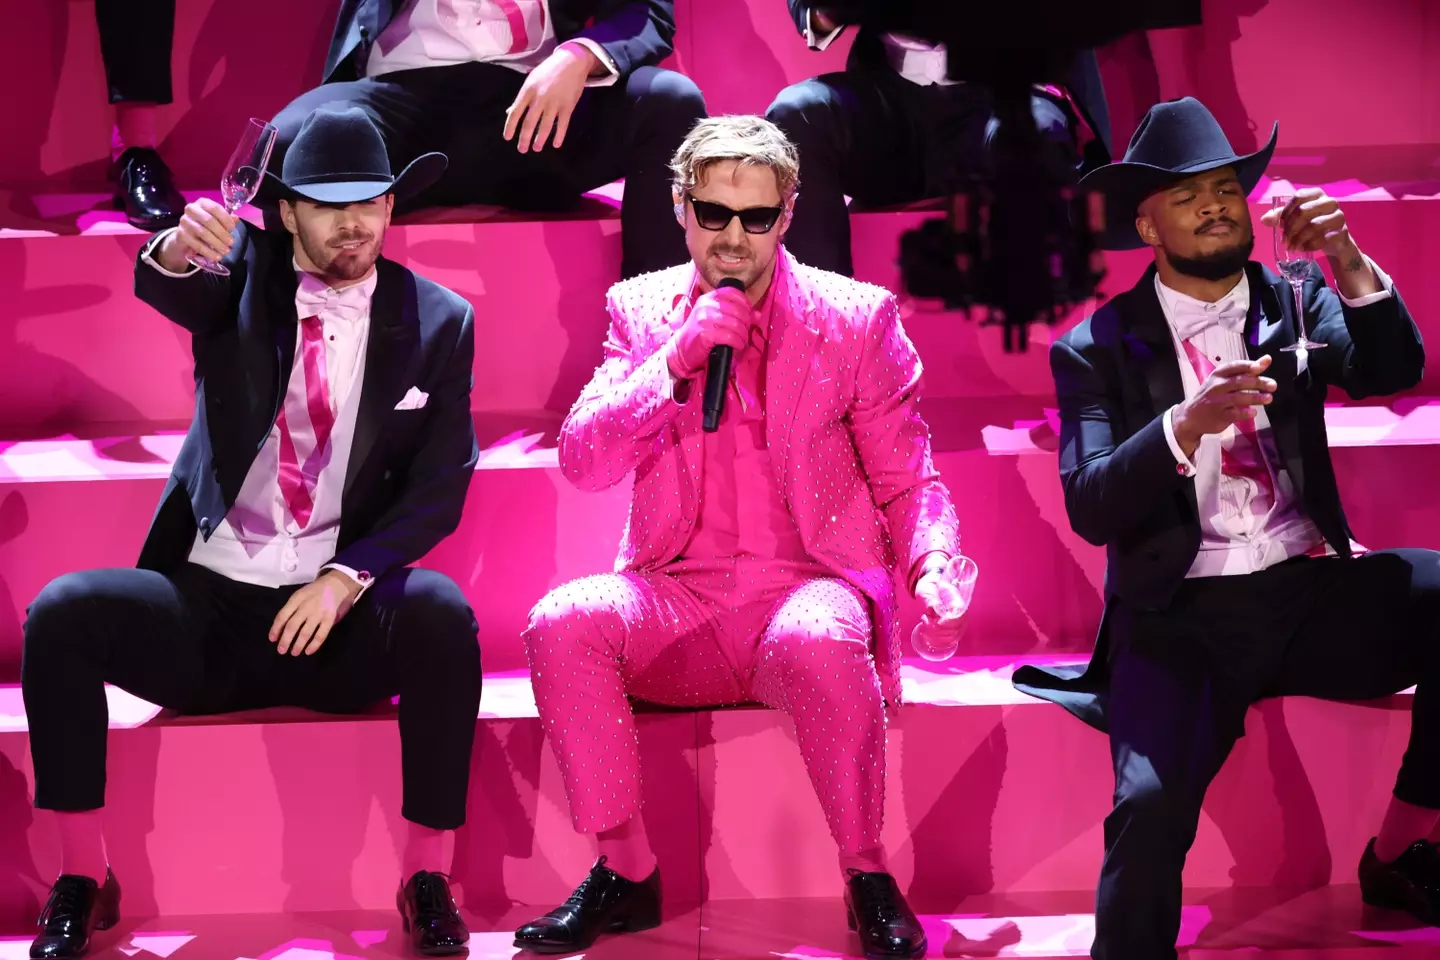 Ryan Gosling's 'I'm Just Ken' performance stole the show.